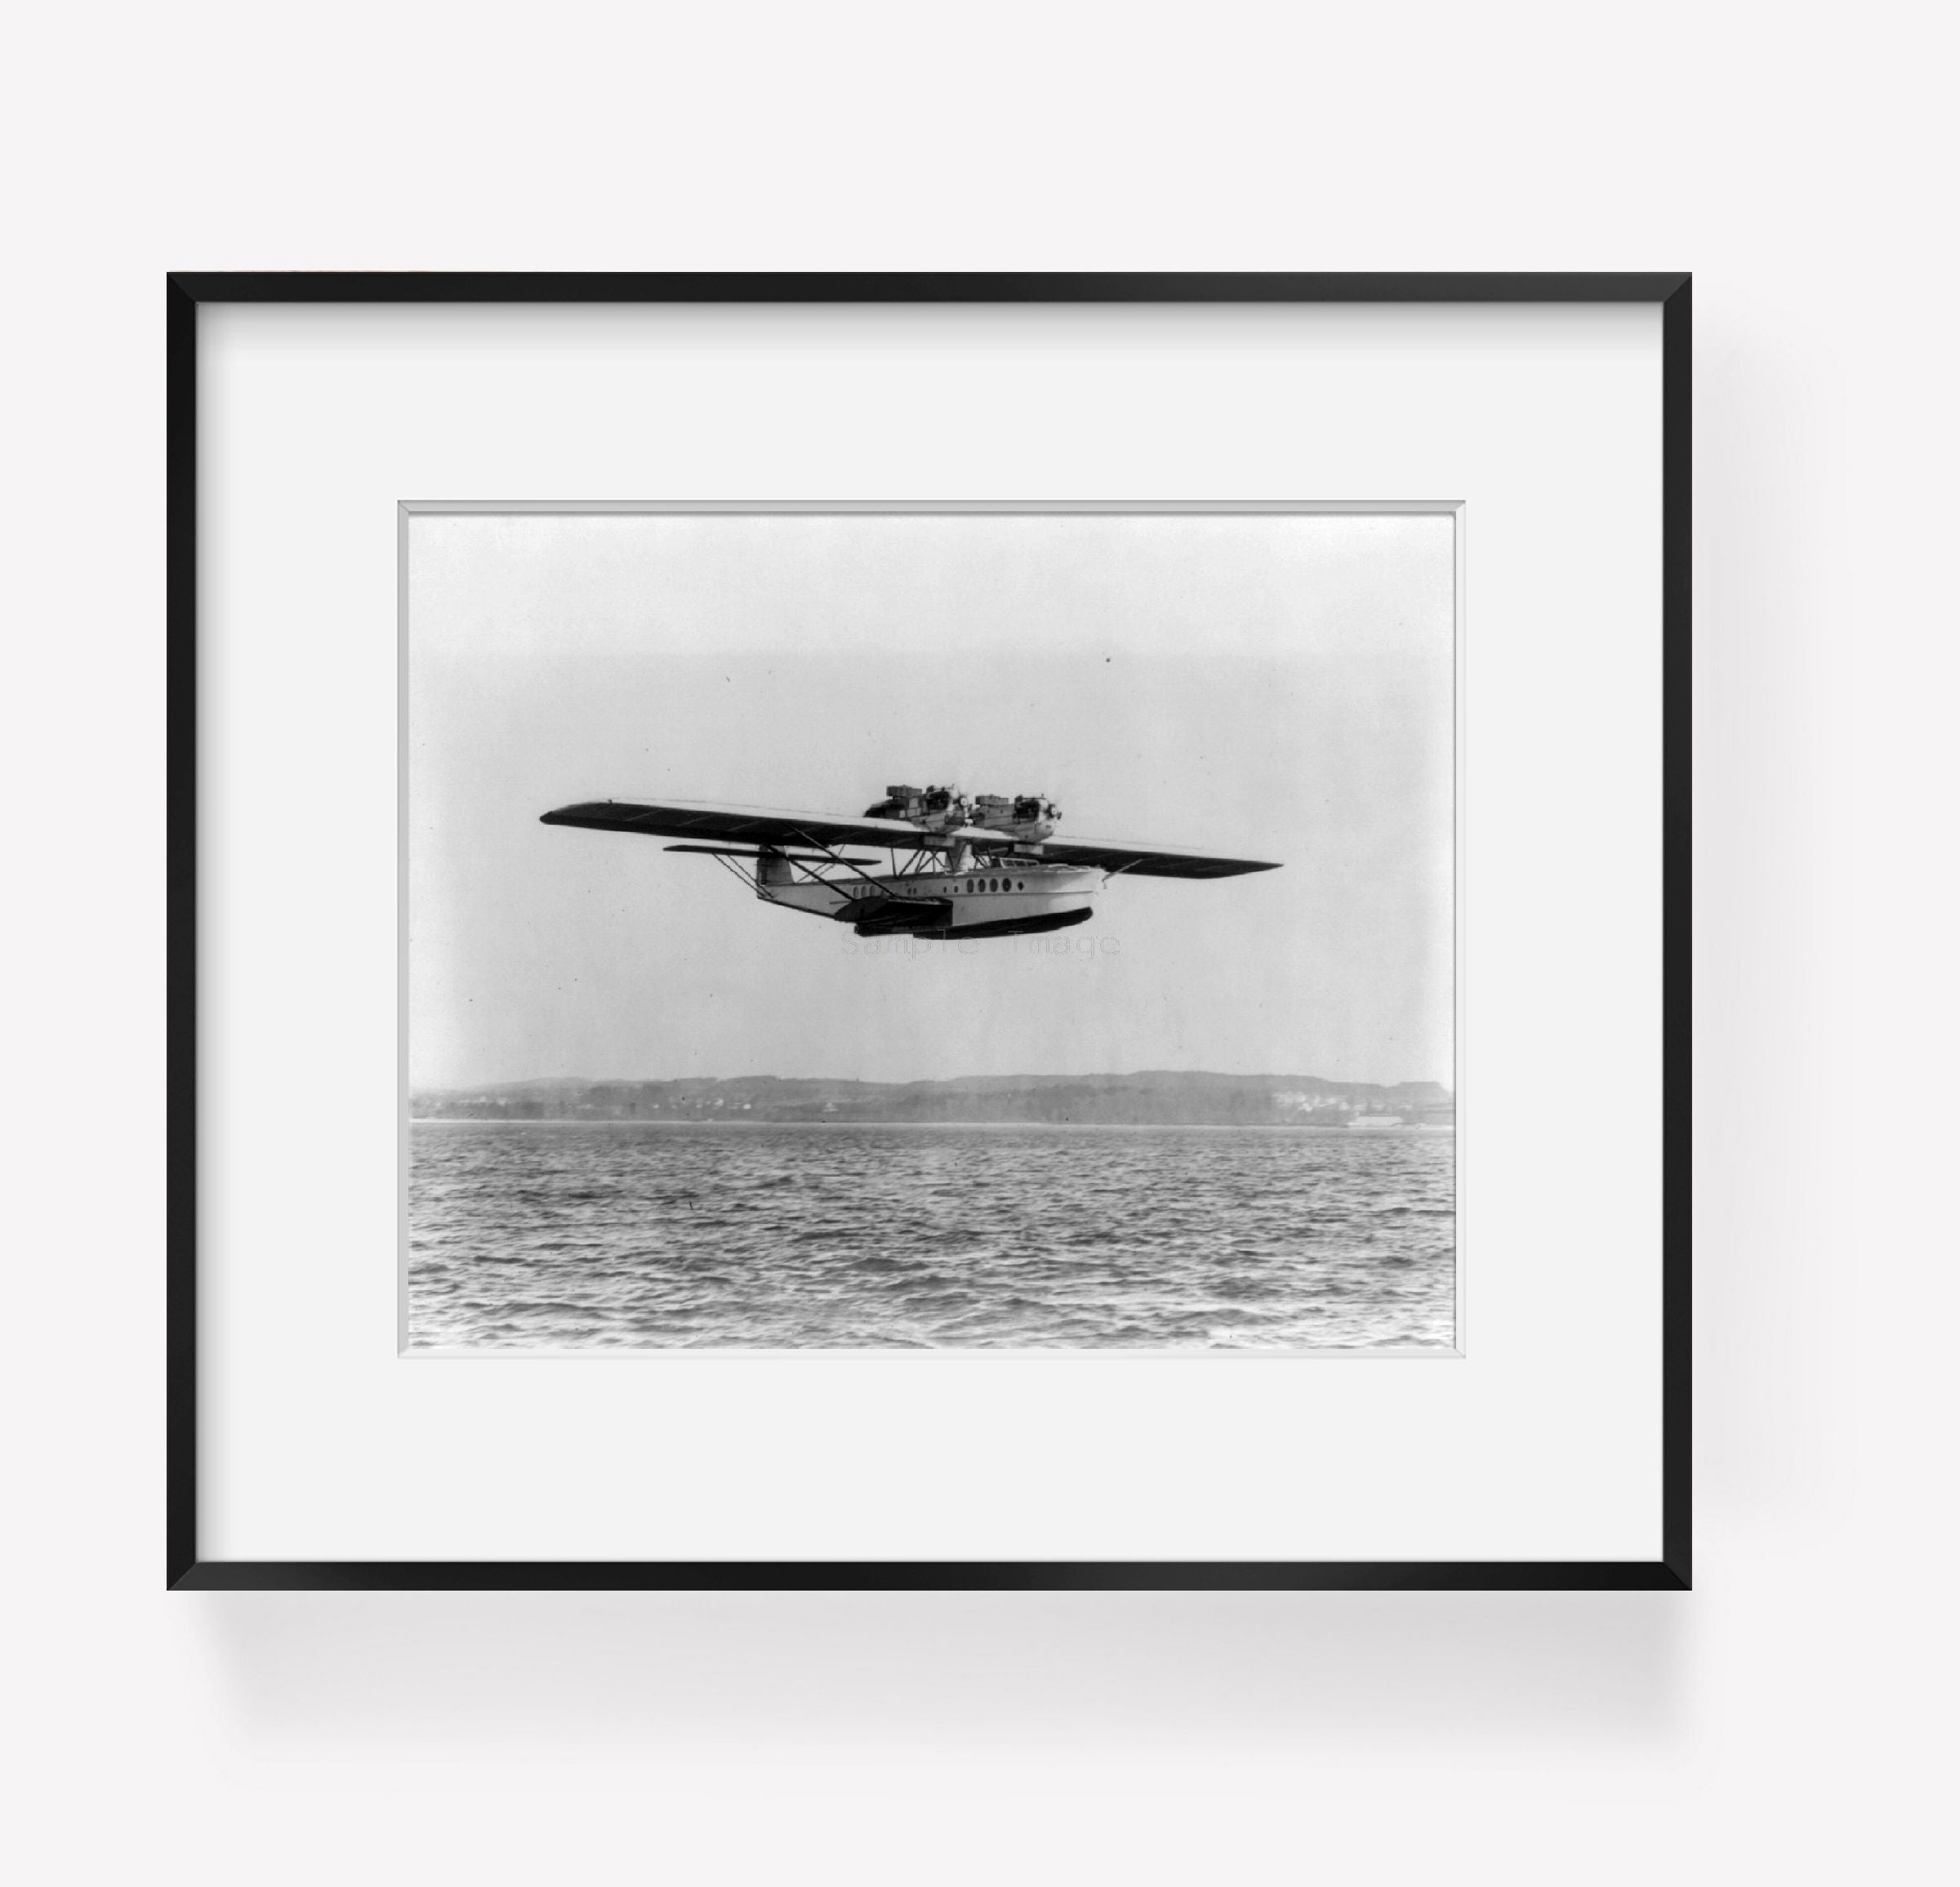 ca. 1928 photograph of Dornier seaplane flying low over water